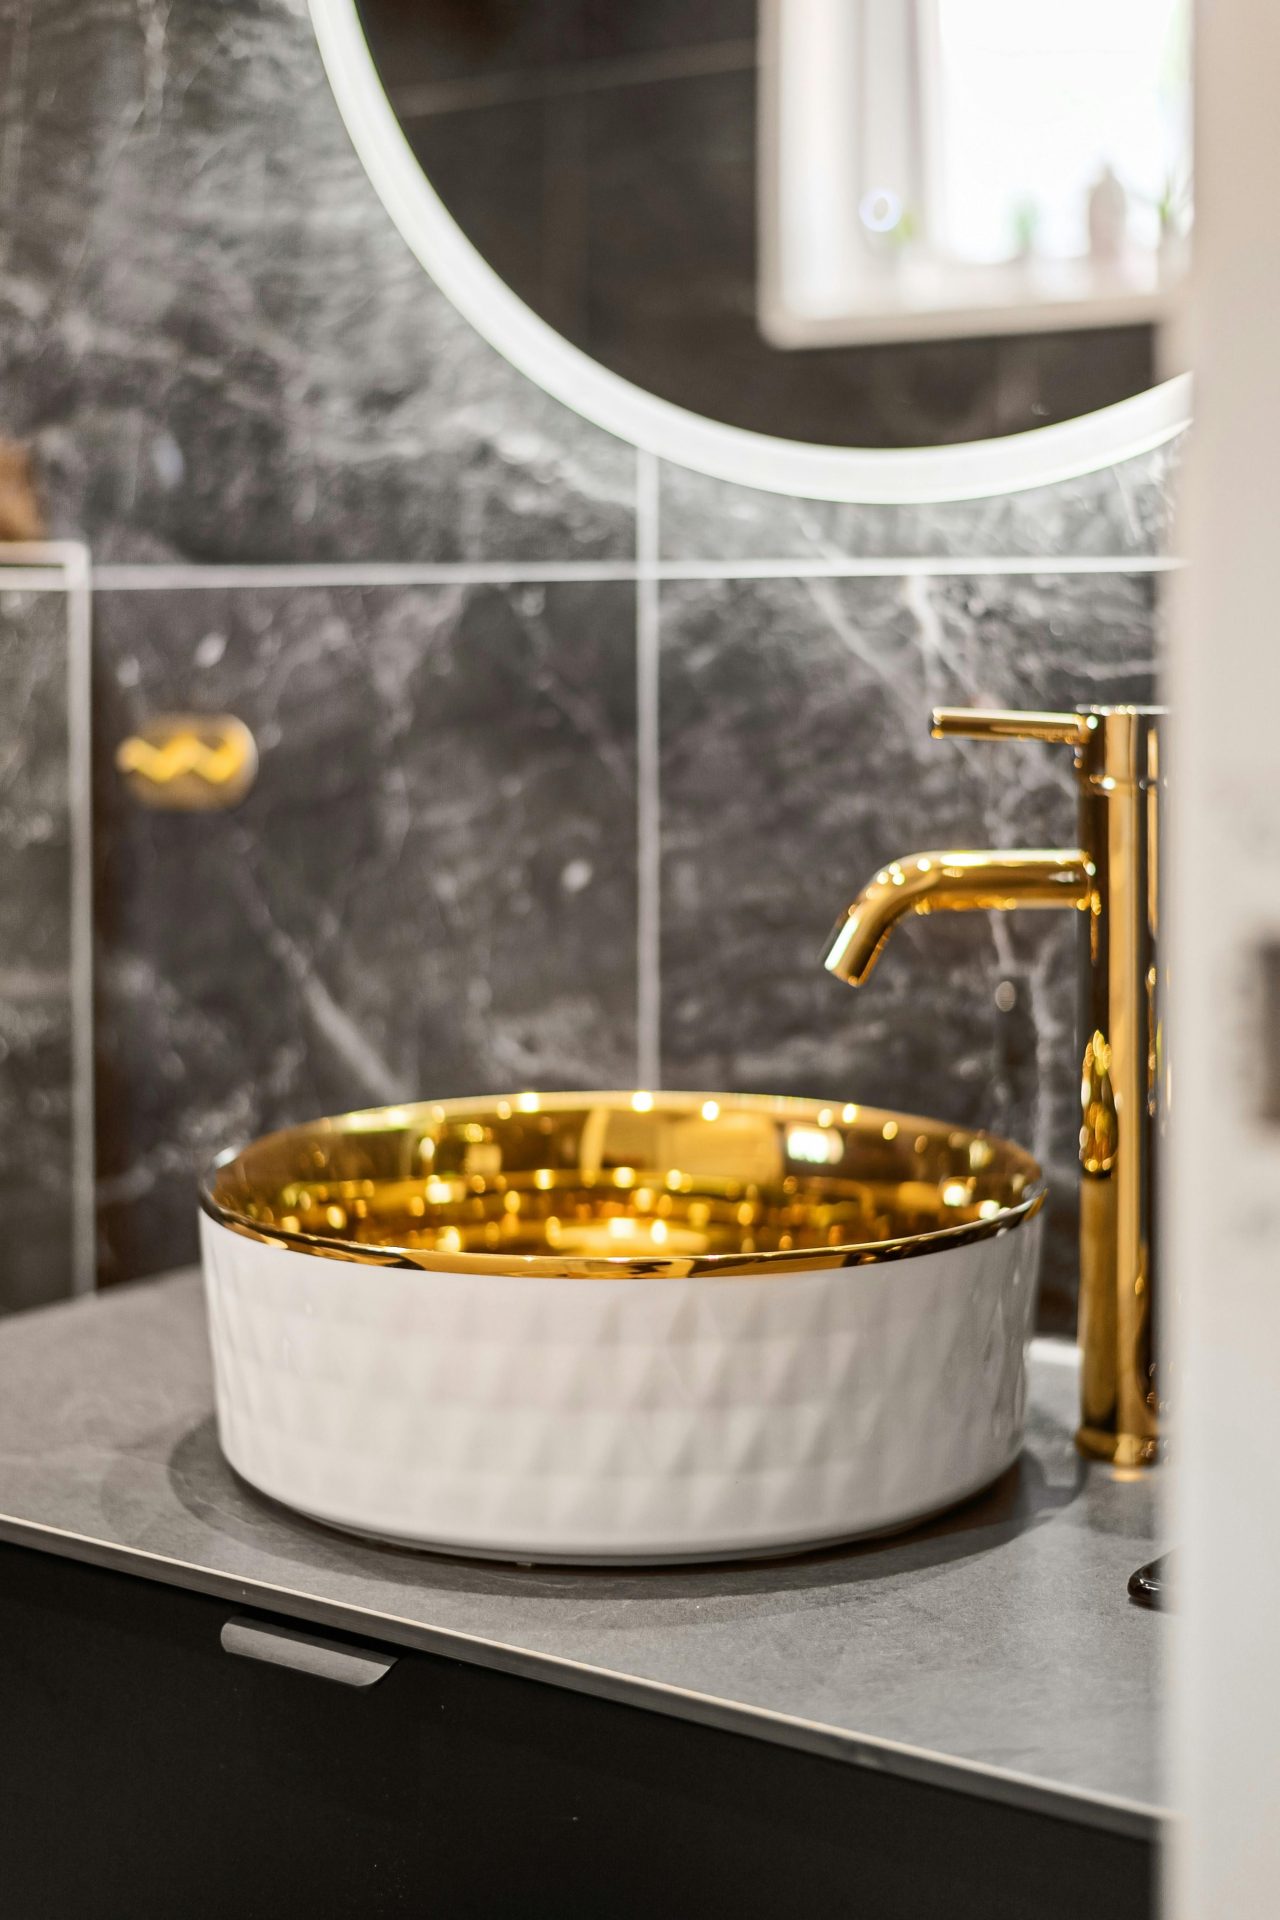 Choosing the Right Features for Your Luxury Bathroom